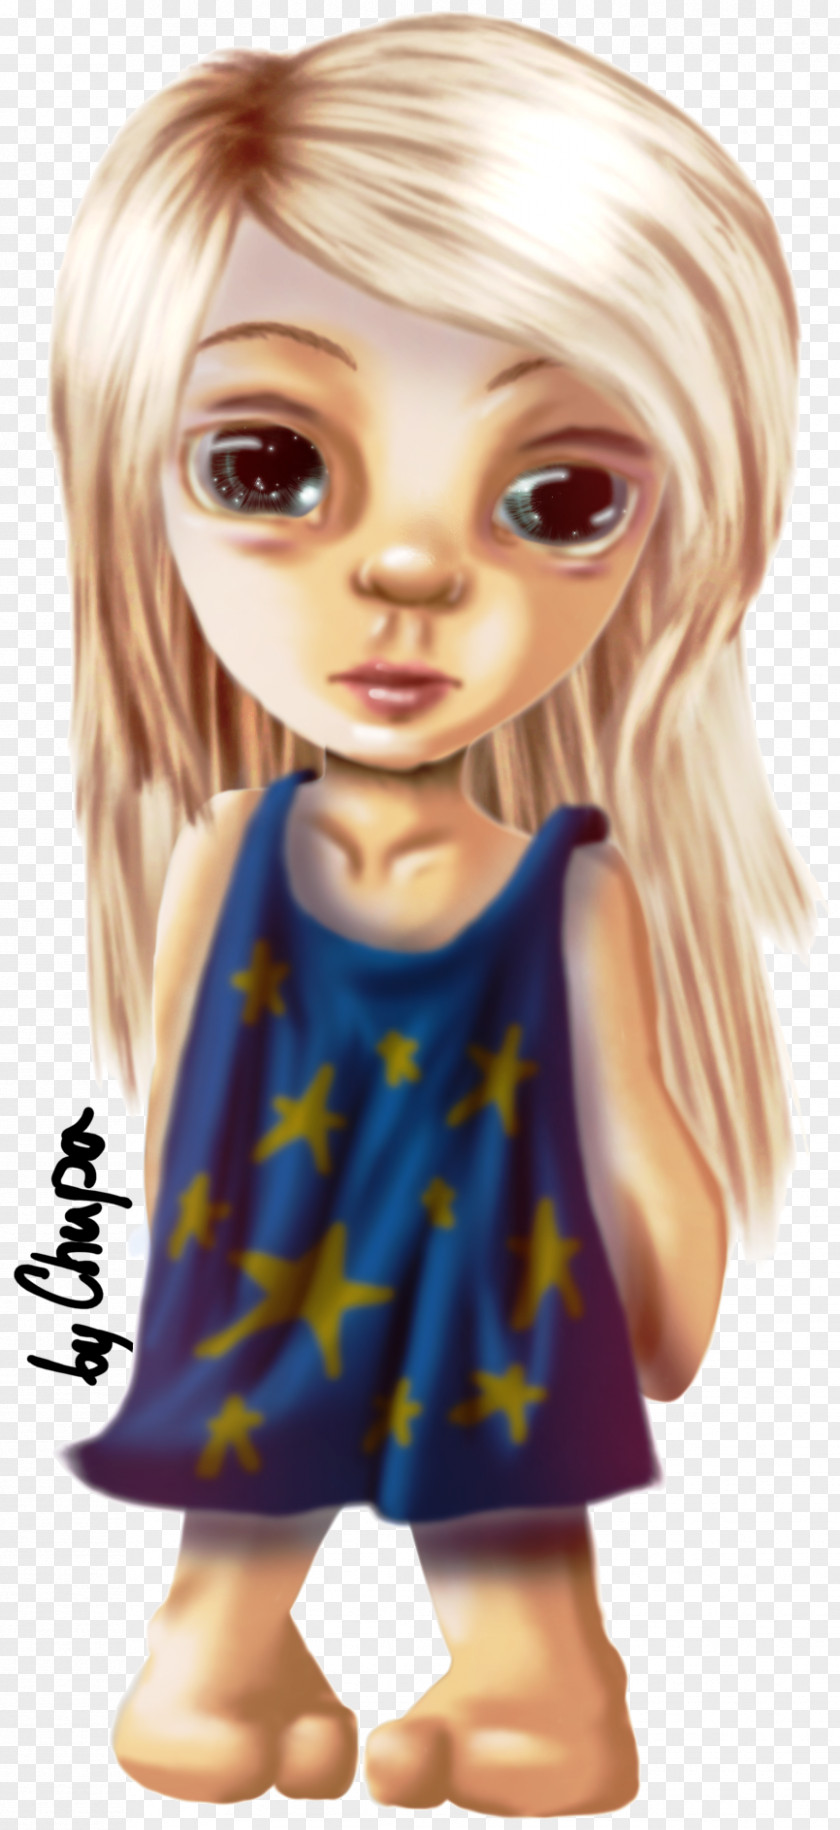 Doll Blond Brown Hair Character PNG